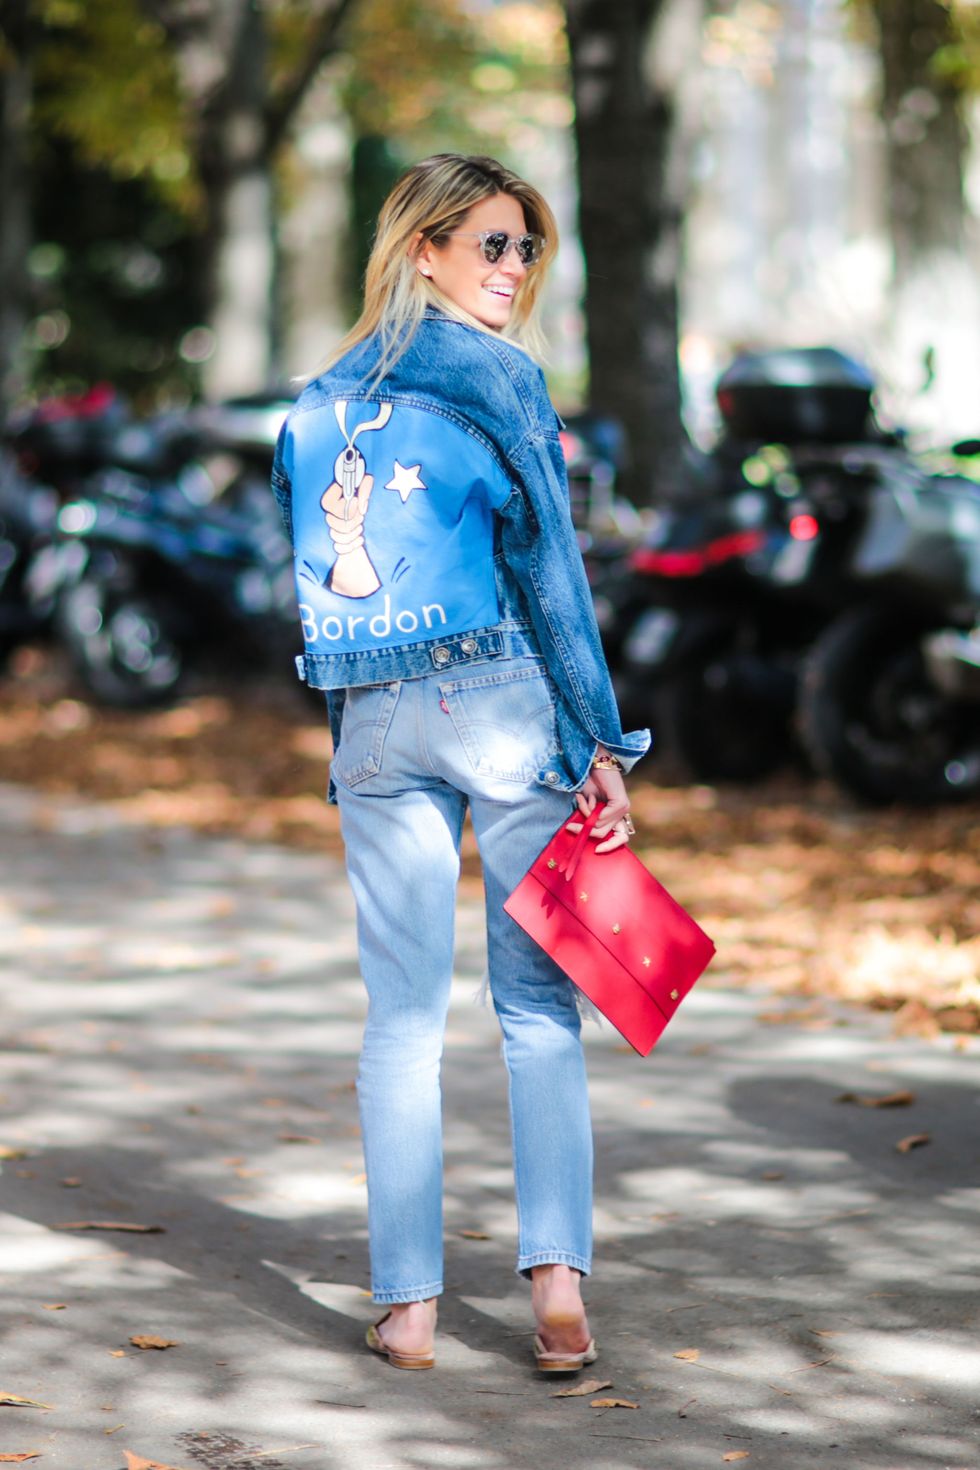 PARIS, FRANCE - OCTOBER 03:  Helena Bordon wears blue denim jeans, a blue denim jacket with her name written on the back, a red clutch, and sunglasses, outside of the Giambattista Valli show during Paris Fashion Week Spring Summer 2017, at Grand Palais, on October 3, 2016 in Paris, France.  (Photo by Edward Berthelot/Getty Images)